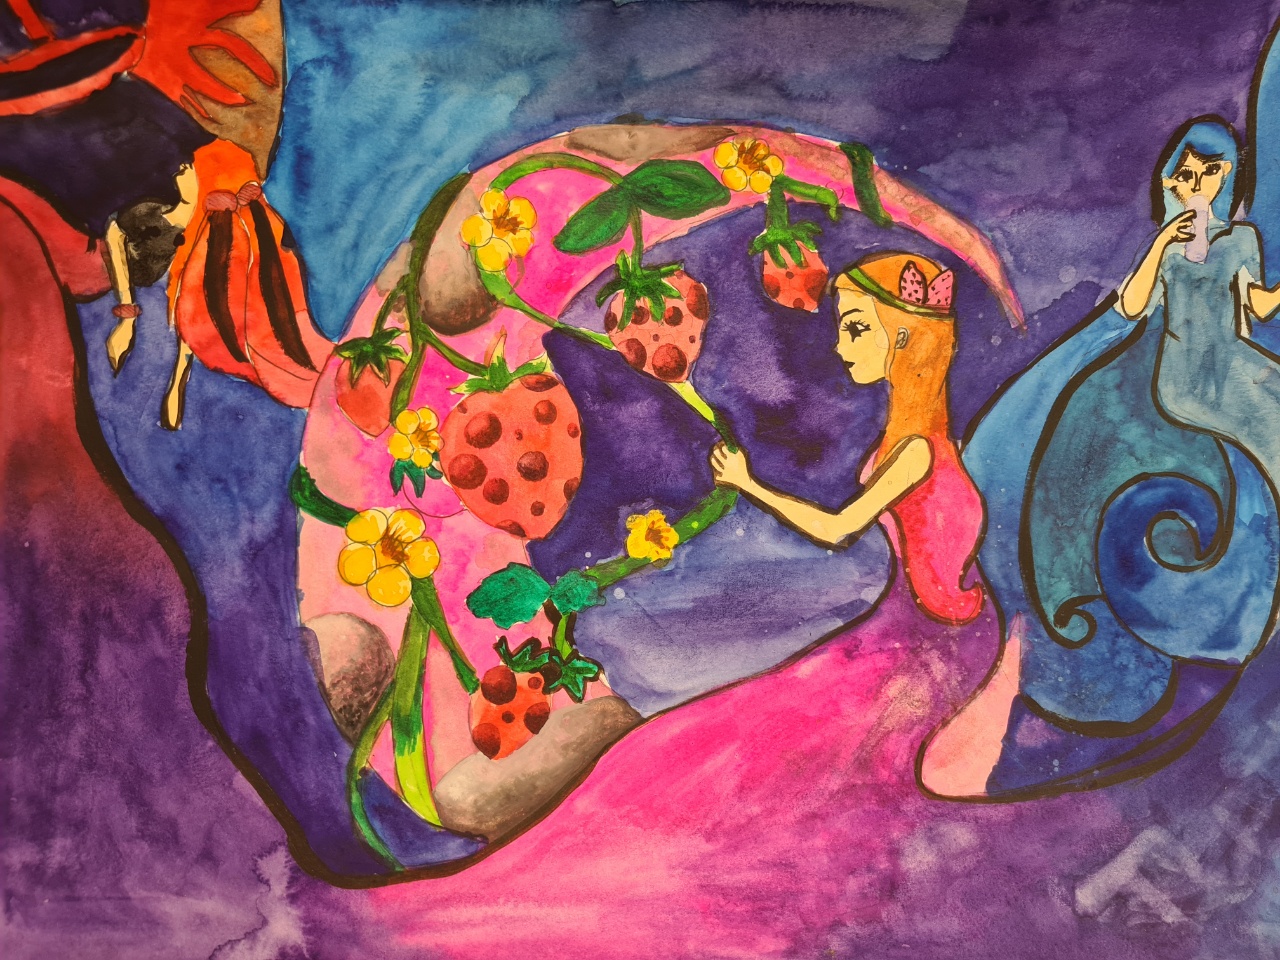 Fantasy moon painting with fairies and a garden in a multitude of colours.